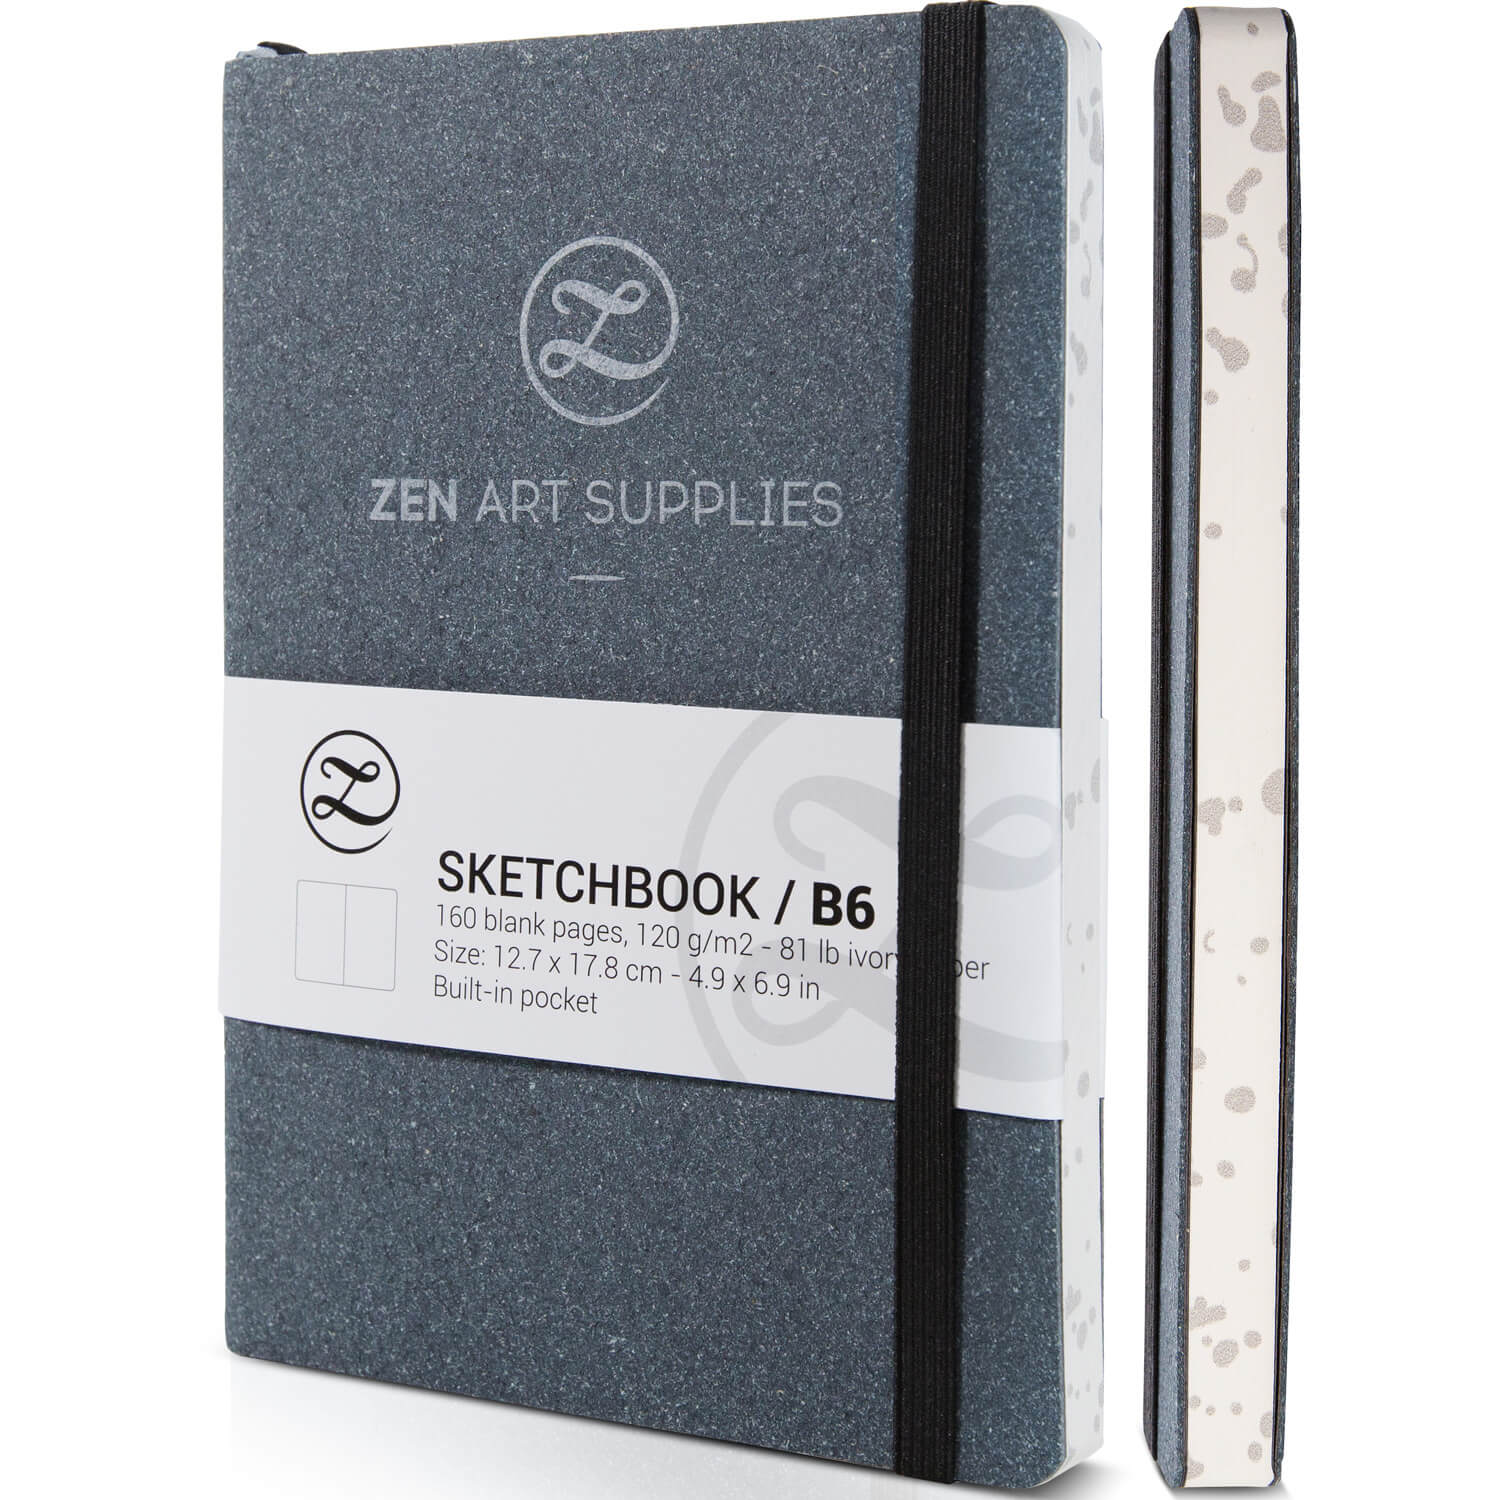 Two Pack Spiral Bound Sketchpad for Travel and Portable Sketch